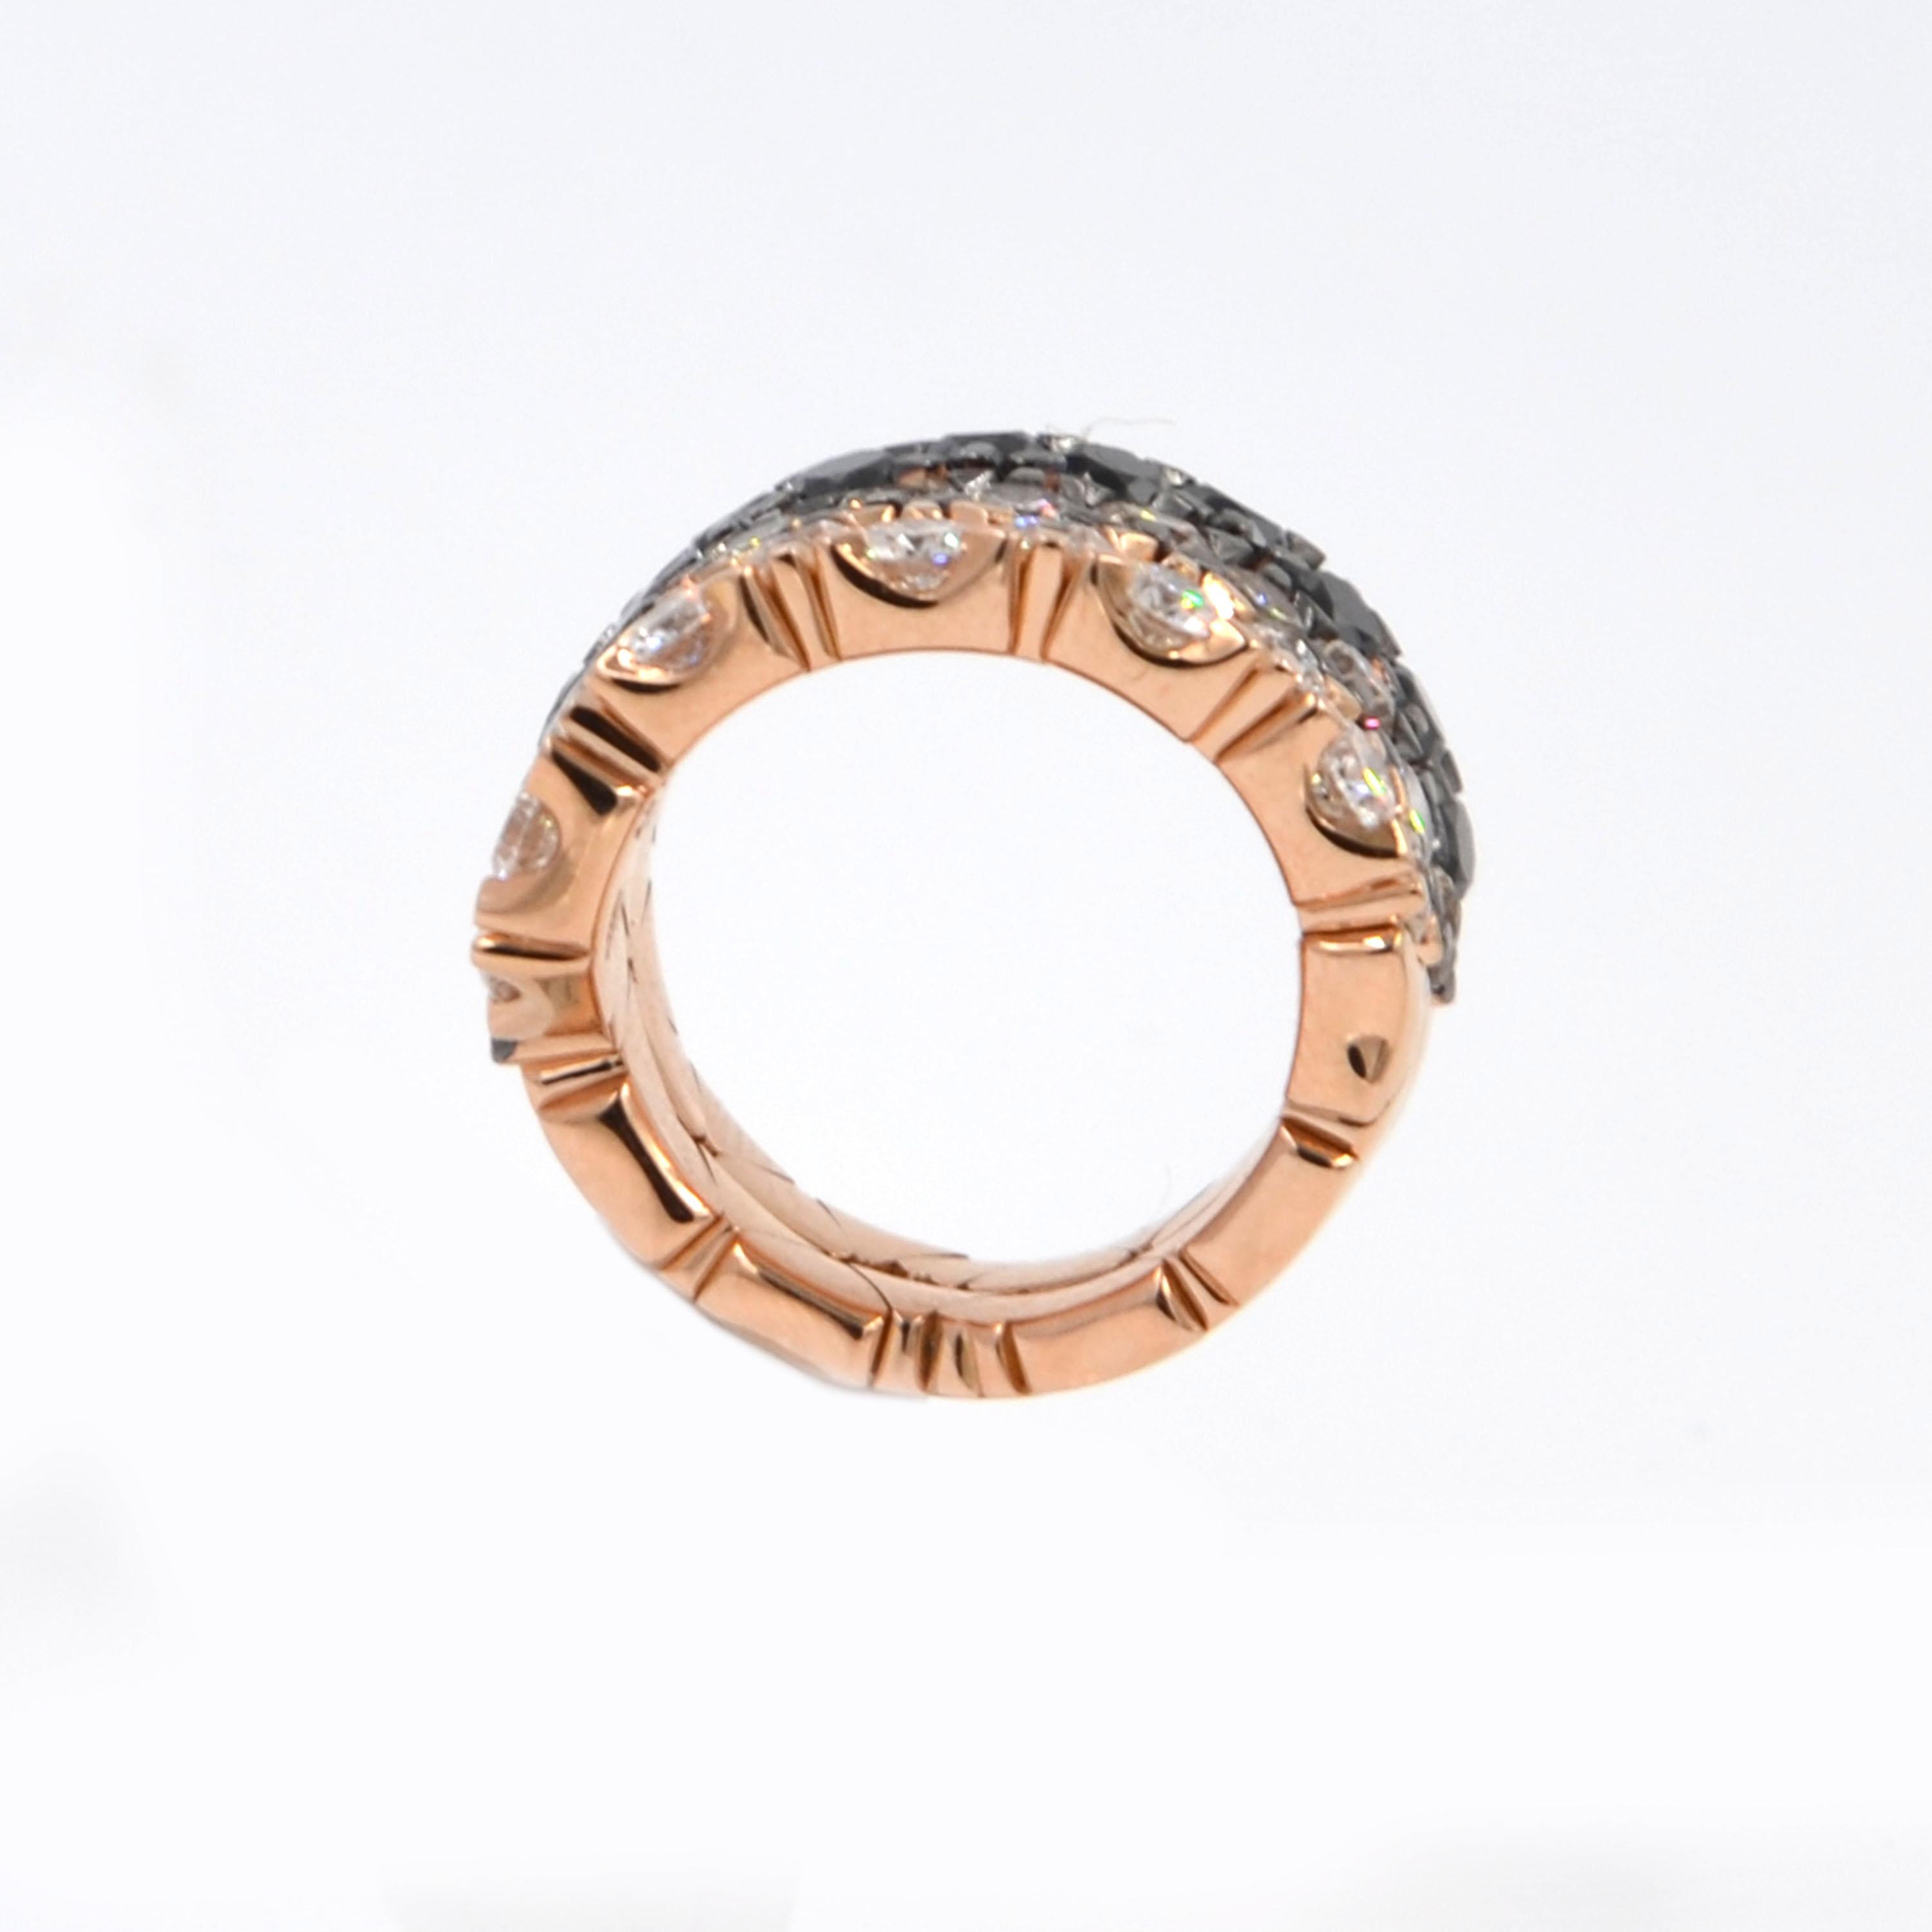 18KT Rose Gold tricolor Diamonds COIL GARAVELLI RING

For the first time on First Dib the famouS Coil Garavelli Collection, triple row new rose gold ring with white, brown and black diamonds. FINGER  SIZE 53 

18KT GOLD  :GR 20,20
BLACK DIAMONDS ct